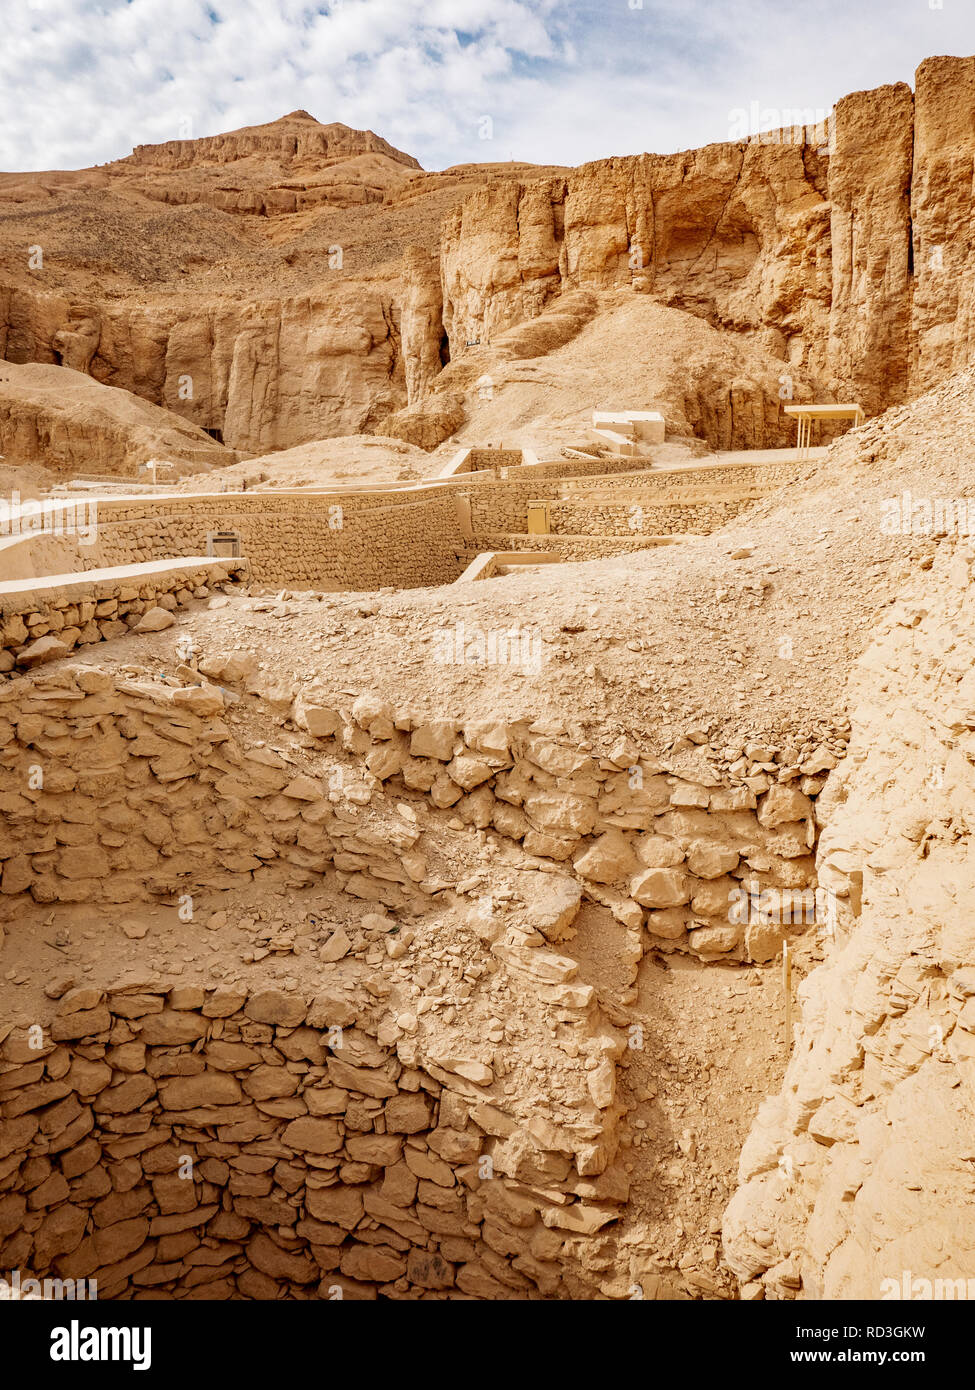 Valley of the Kings in Luxor Egypt tombs excavations Stock Photo